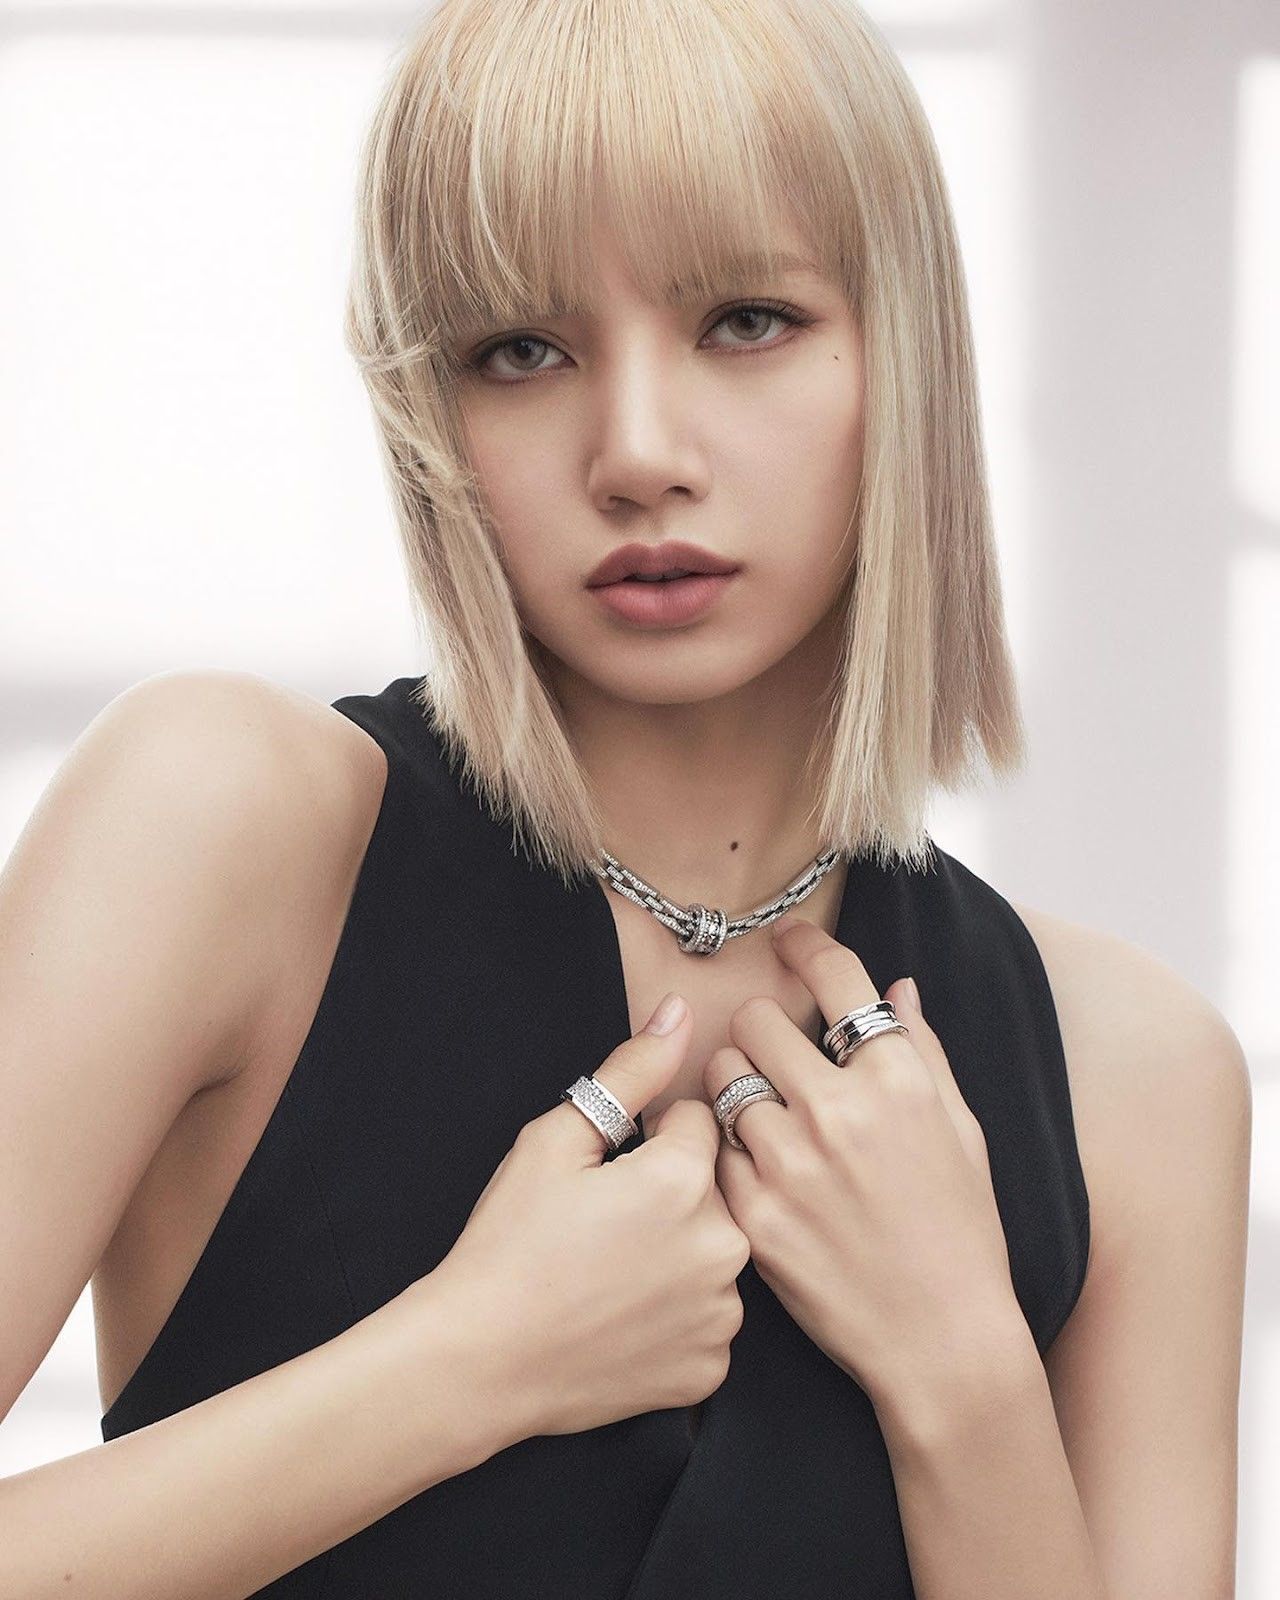 Expensive things owned by Lisa: Bulgari necklace